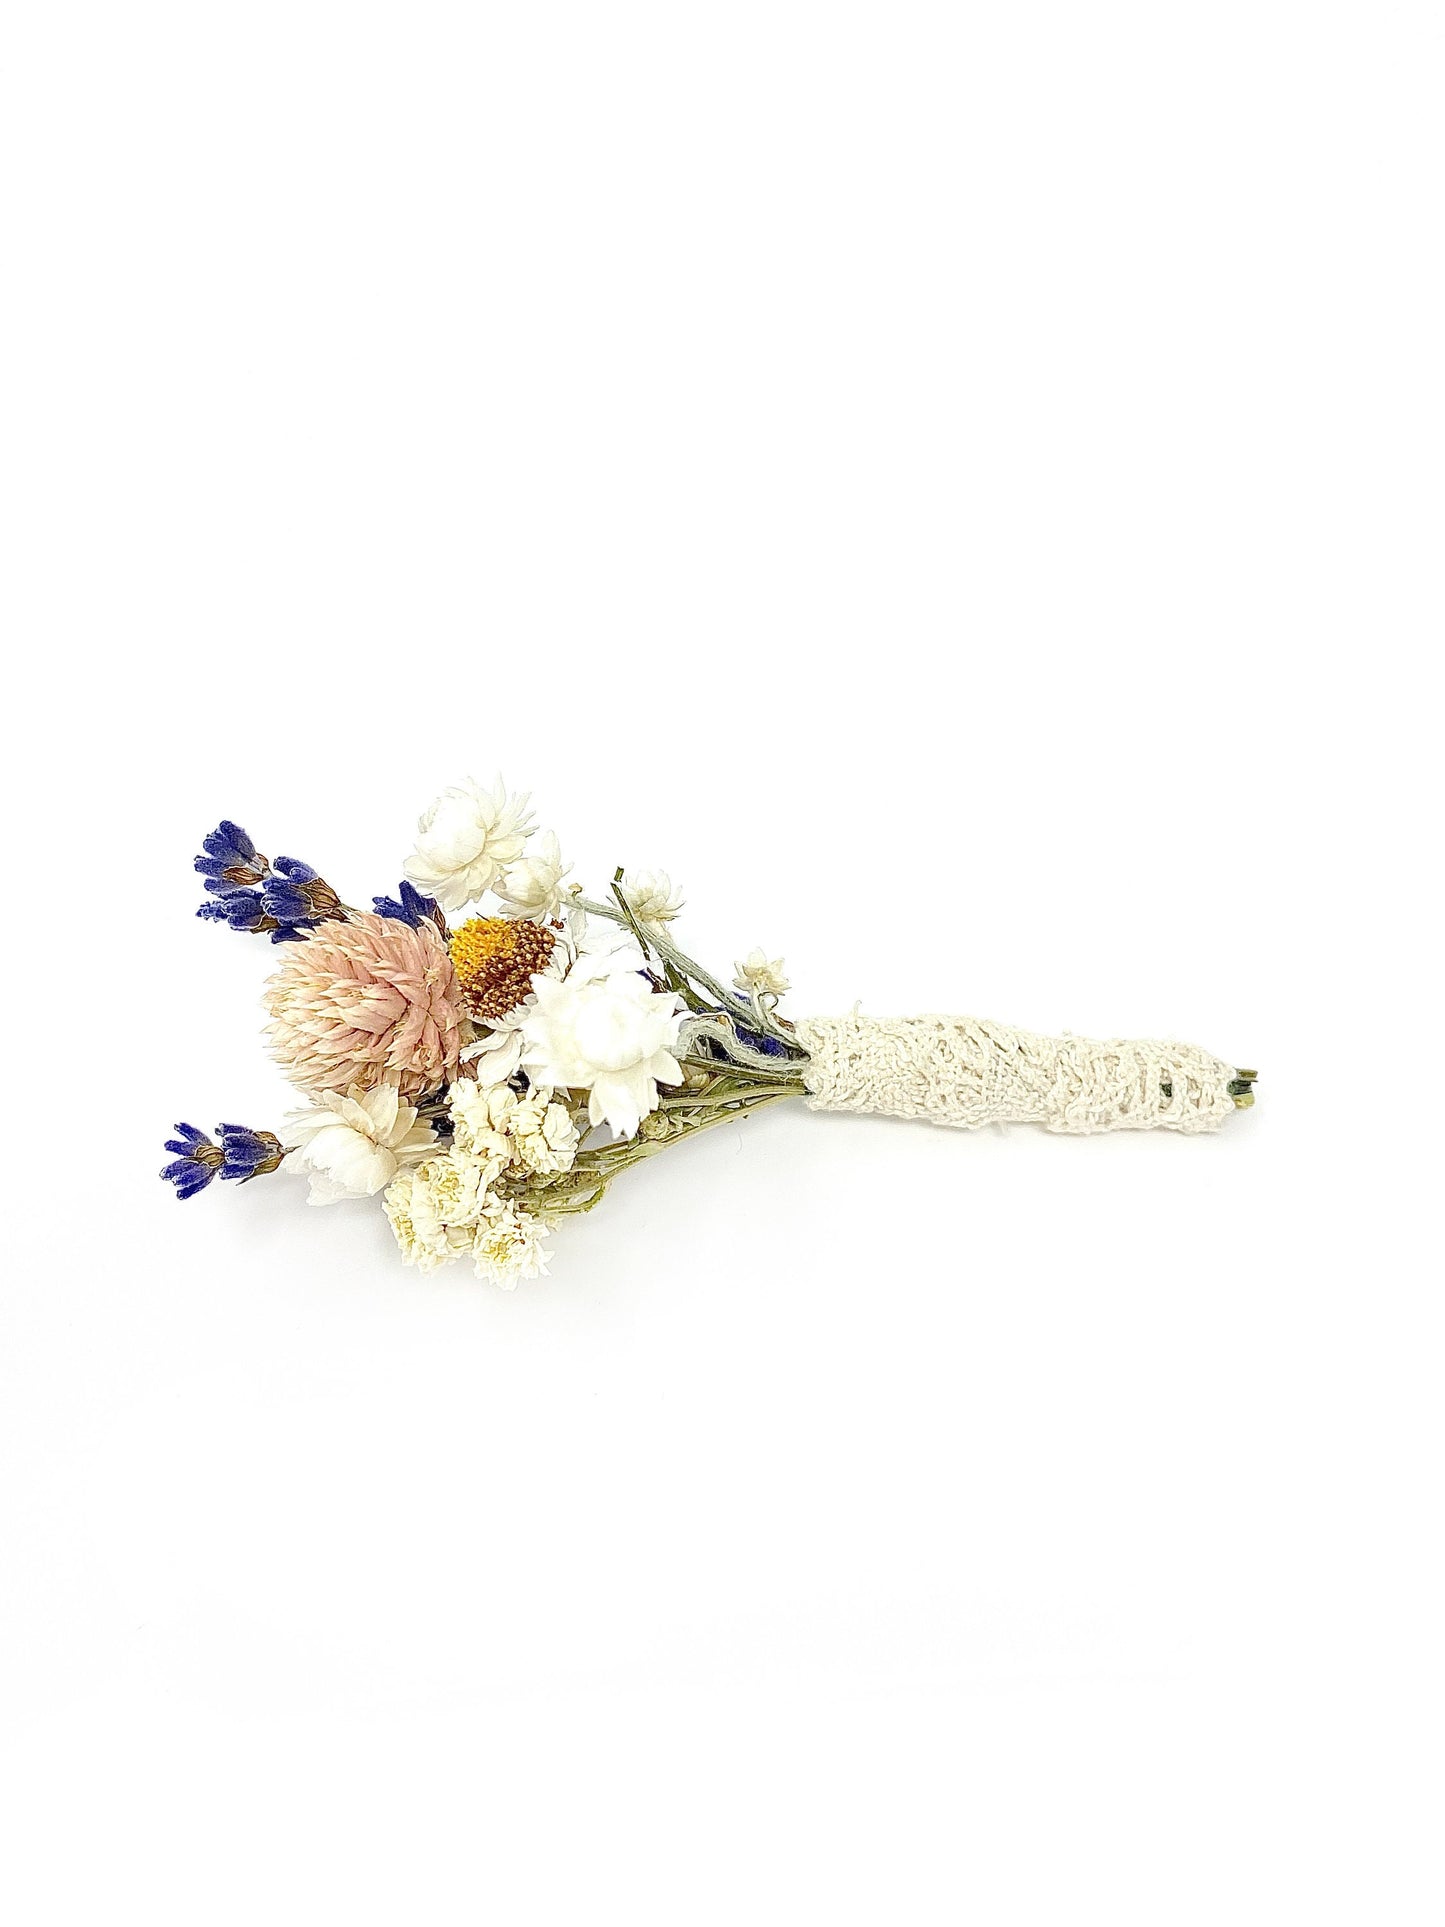 Boutonniere, Wedding Accessories, Dried Flowers, Preserved Floral, Bridal, Decor, Pink and Purple, Ammobium, Lavender